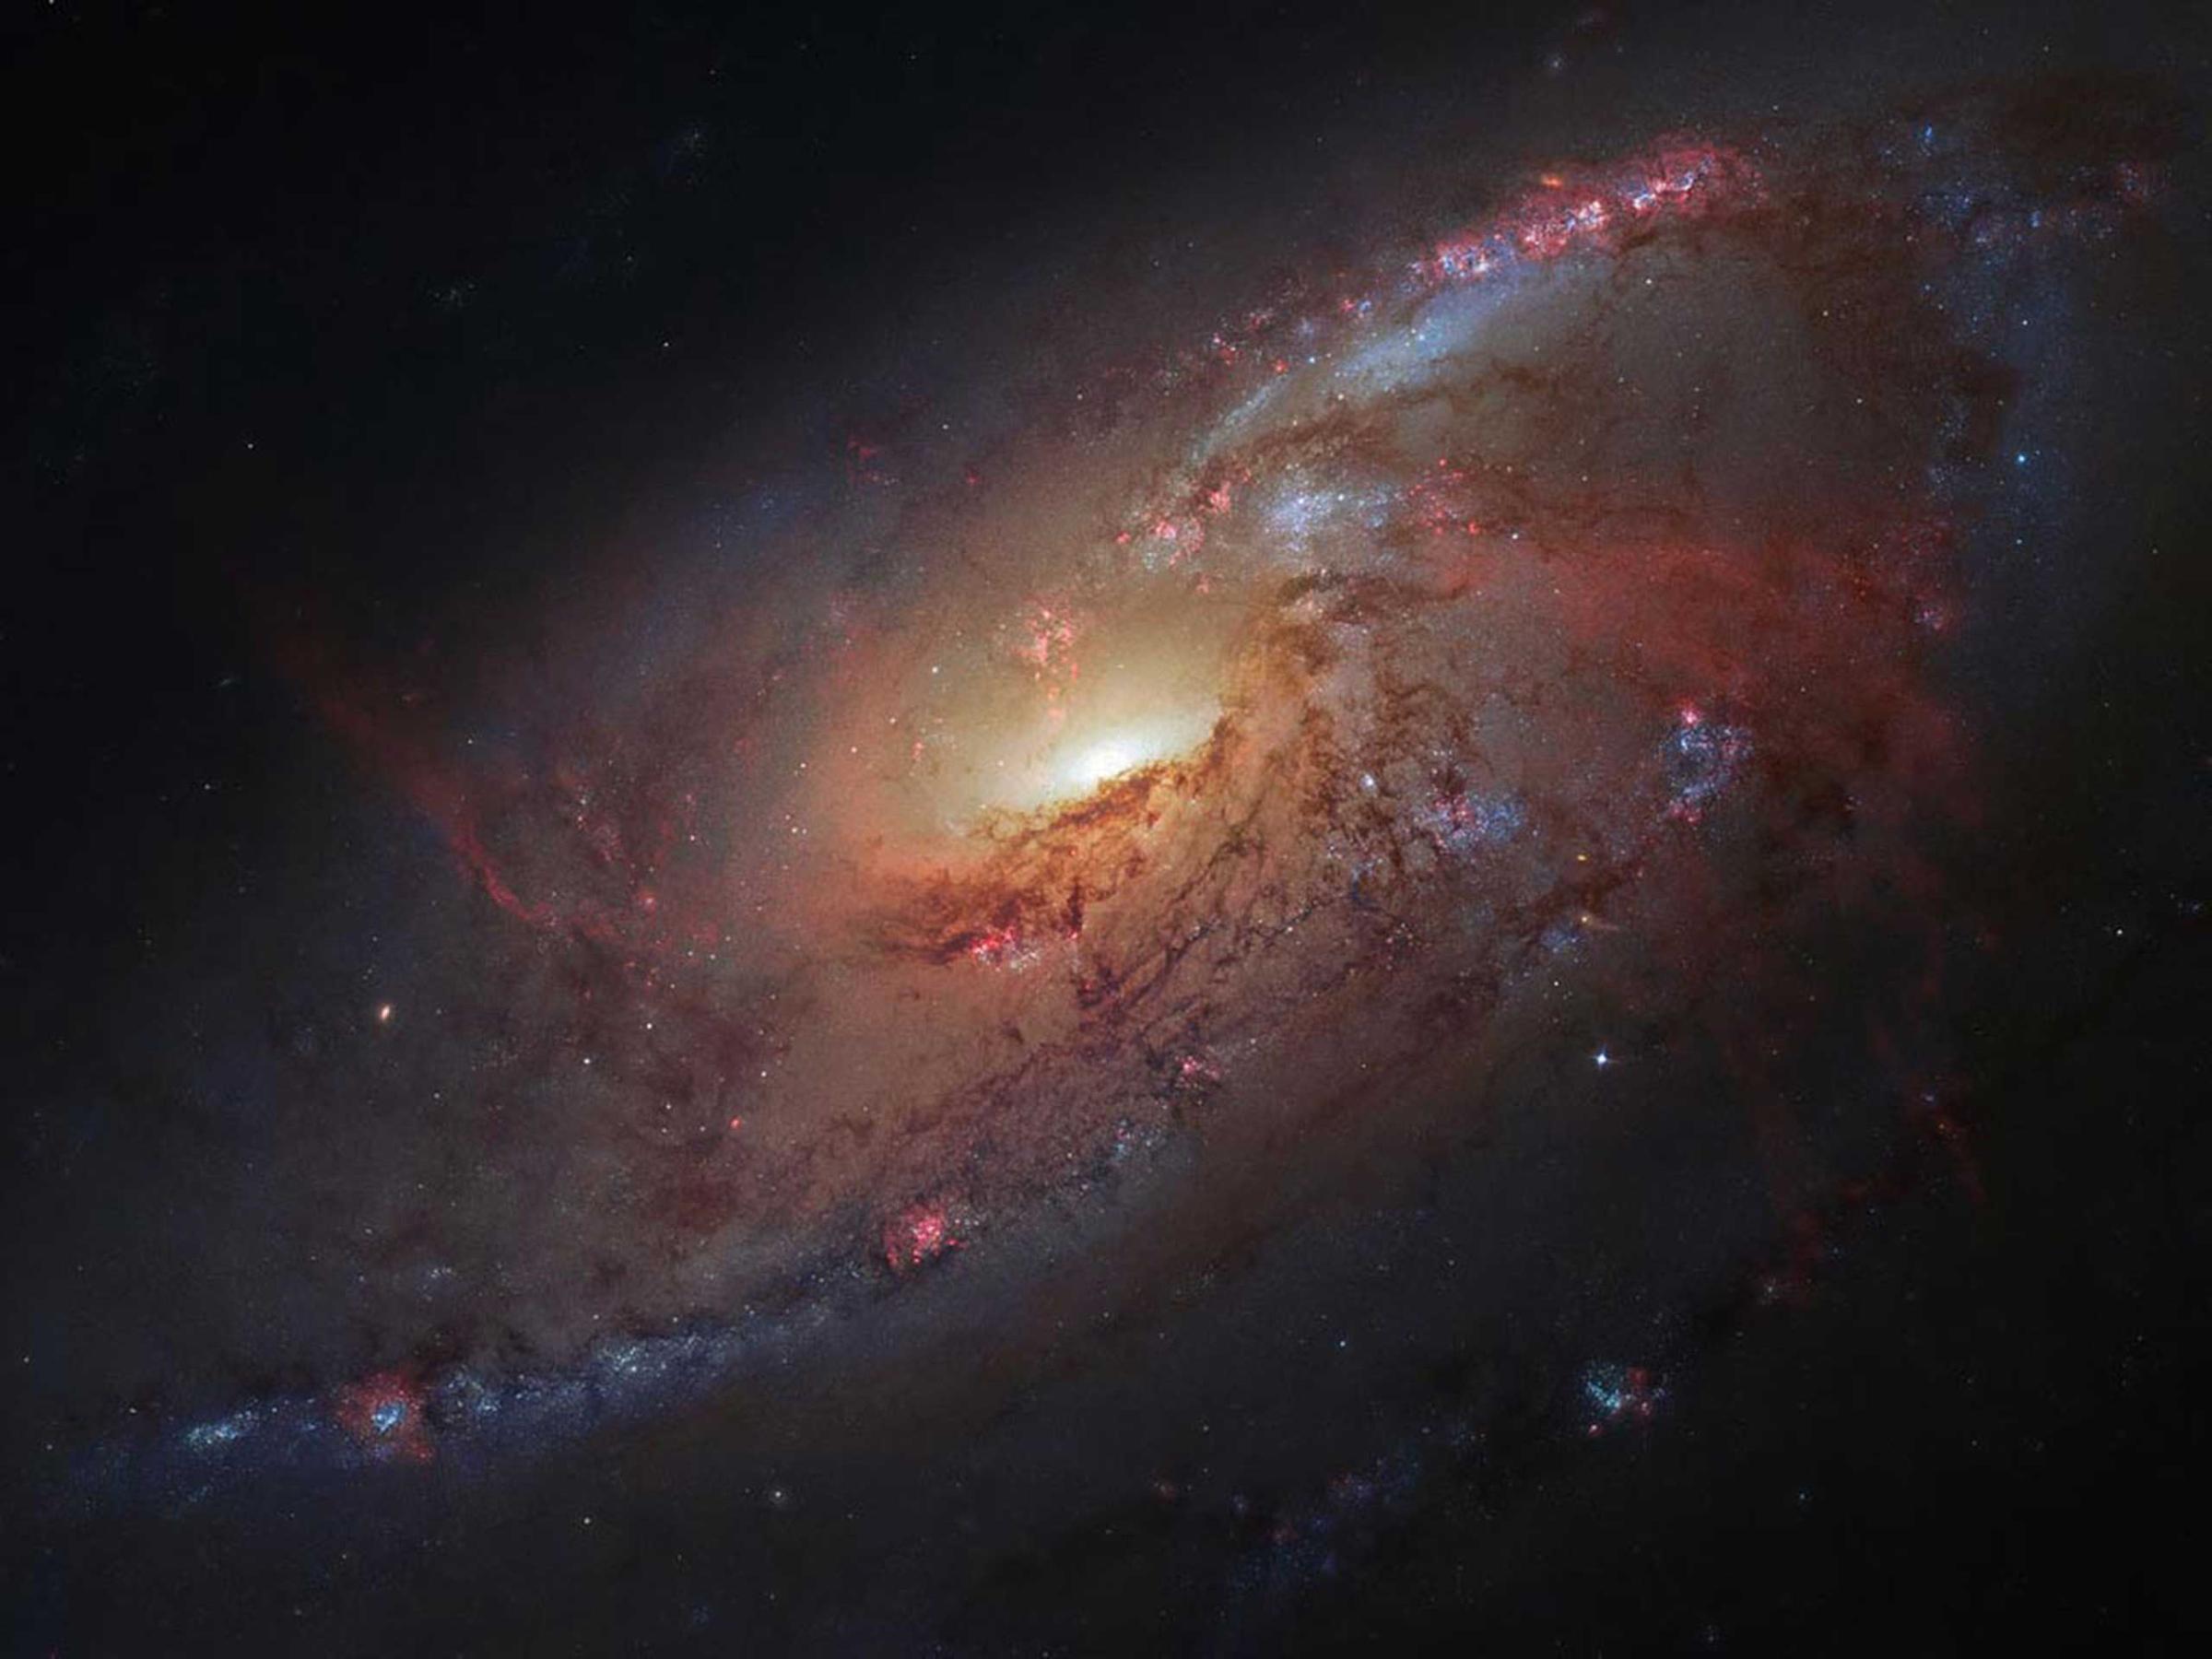 This image combines Hubble Space telescope observations of the M 106 galaxy with additional information captured by amateur astronomers Robert Gendler and Jay GaBany.